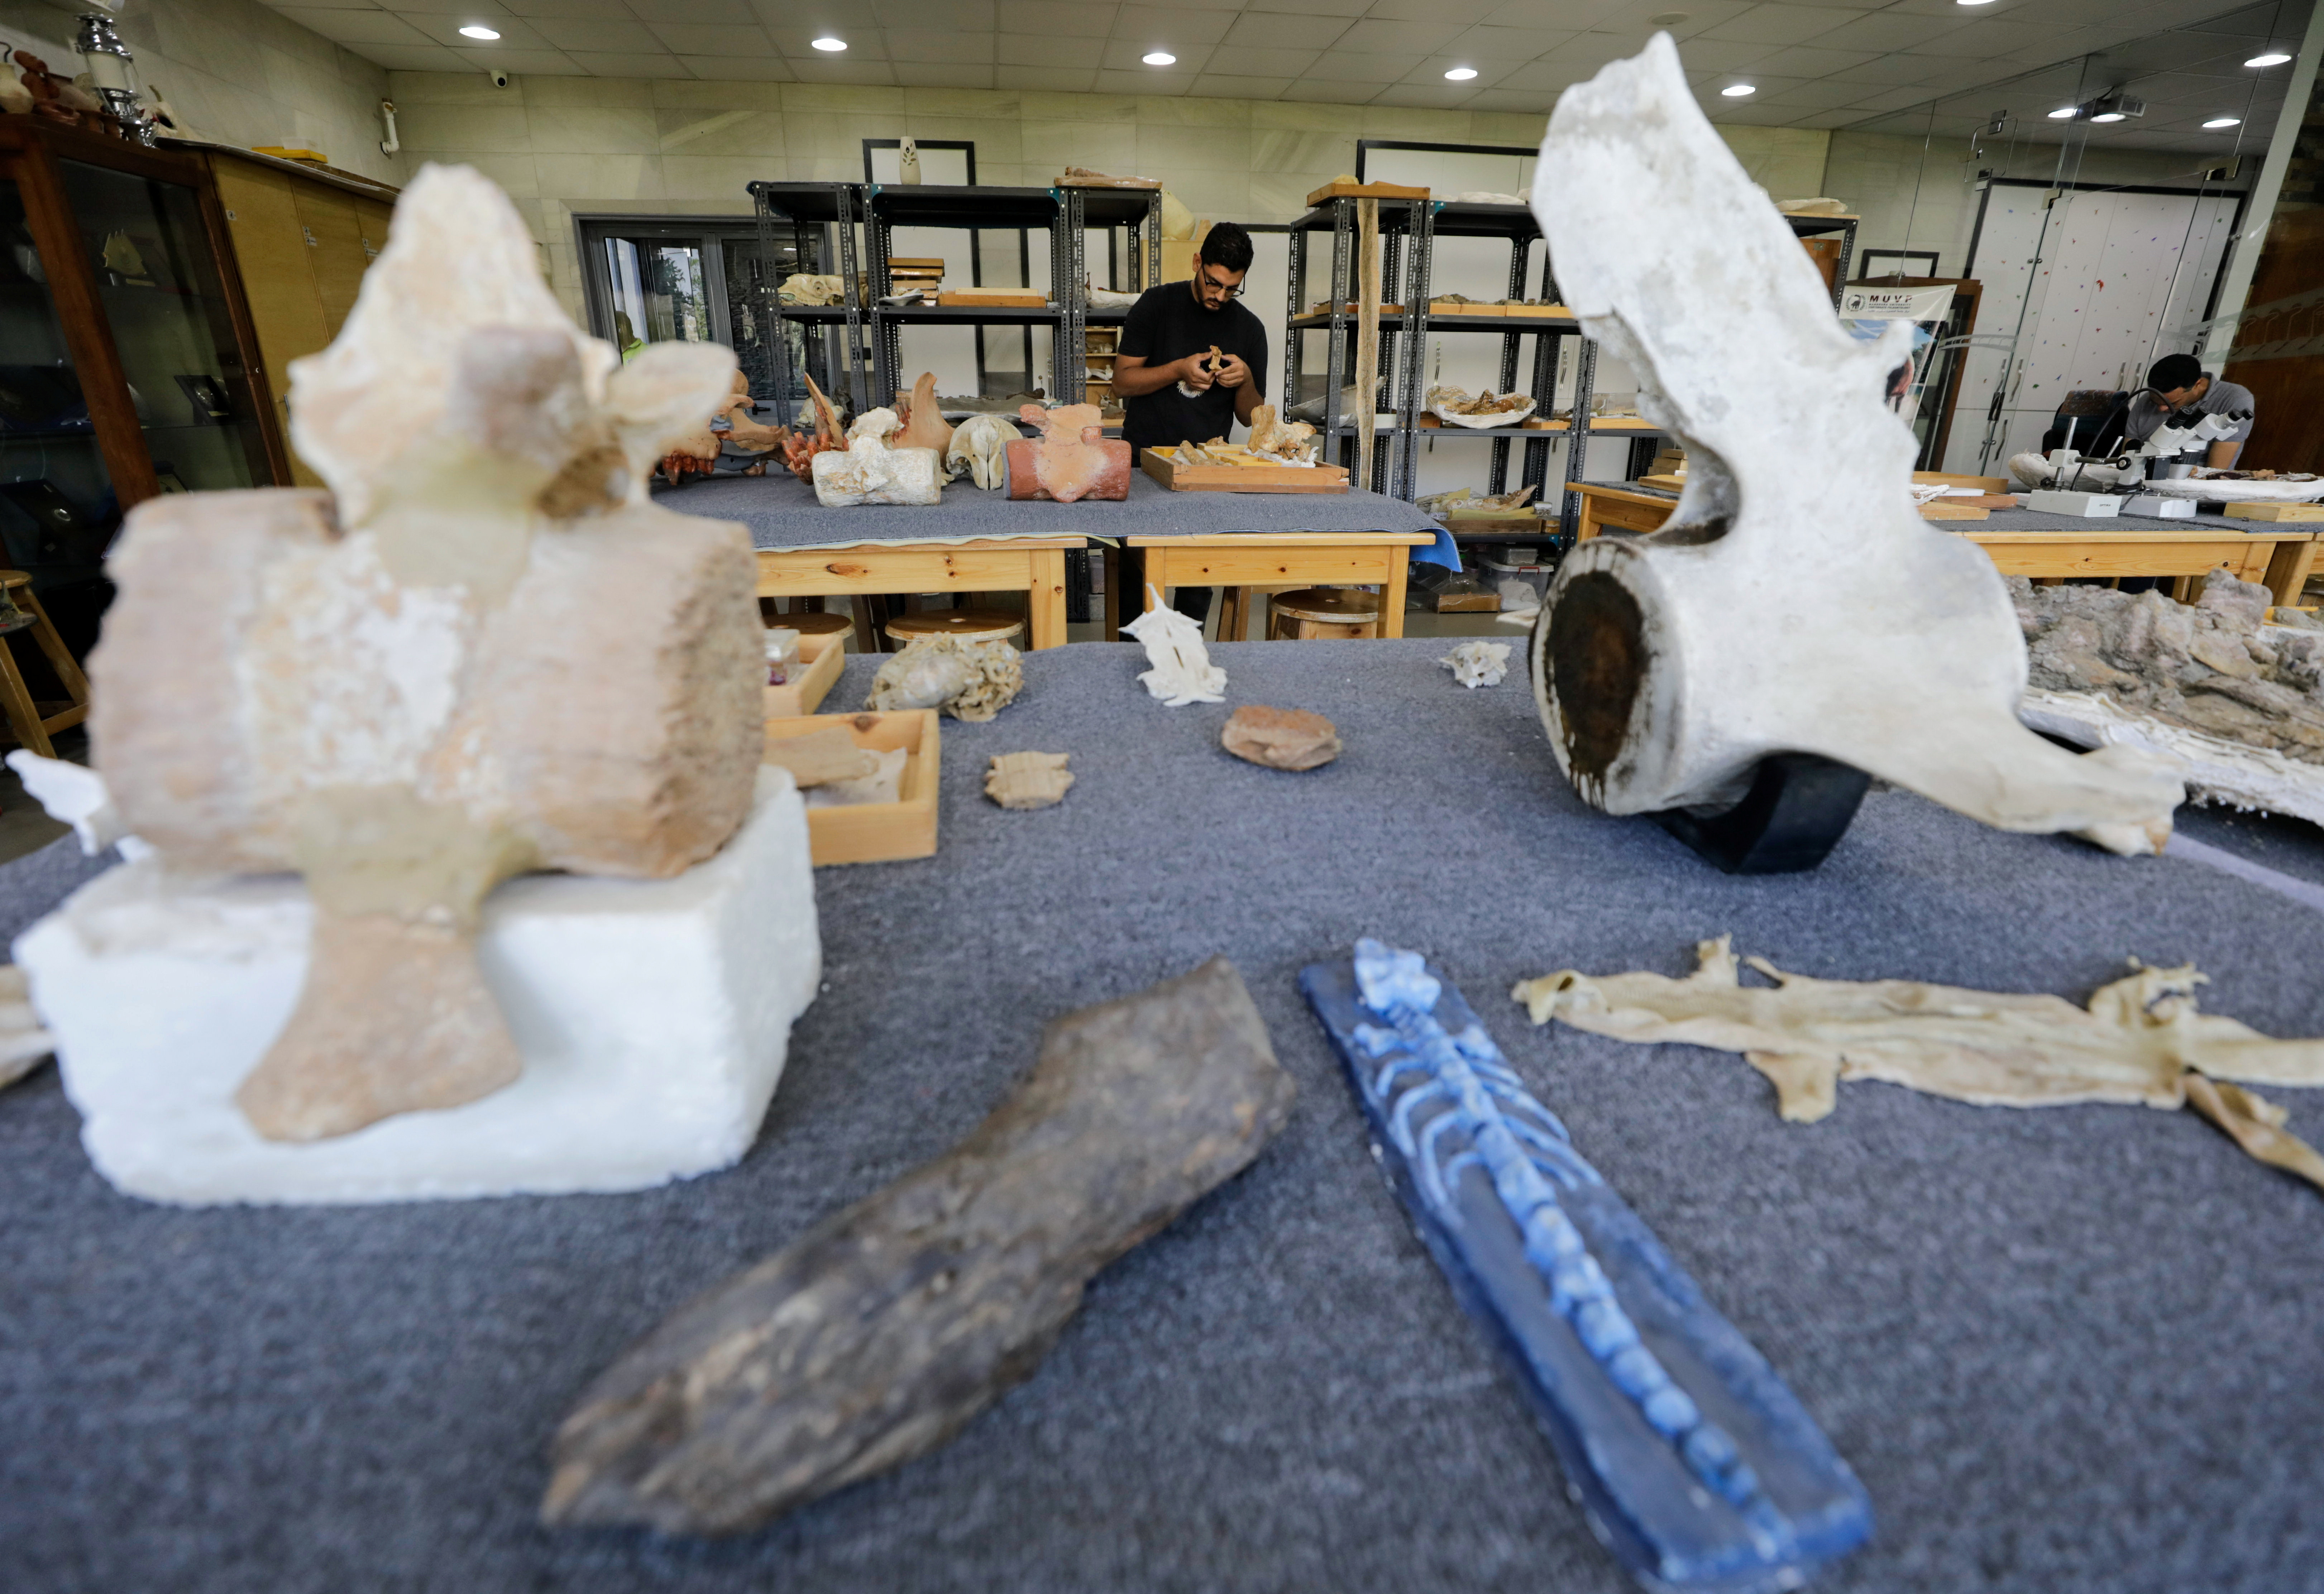 Abdullah Gohar, a researcher at El Mansoura university works on renovating the 43 million-year-old fossil of a previously unknown amphibious whale called 